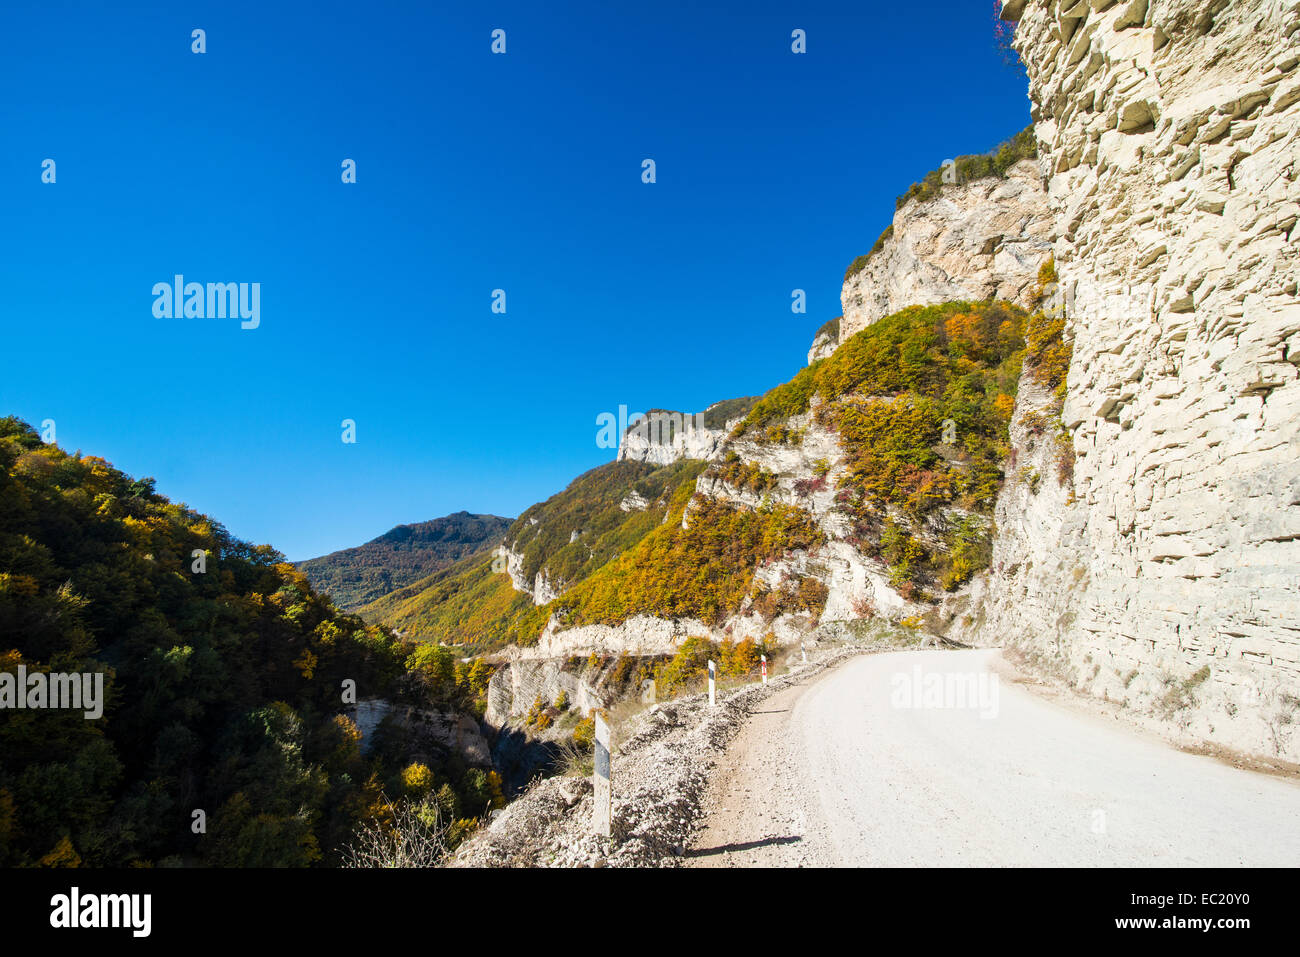 Road through a gorge on the Argun river, mountains of Chechnya, Caucasus, Russia Stock Photo